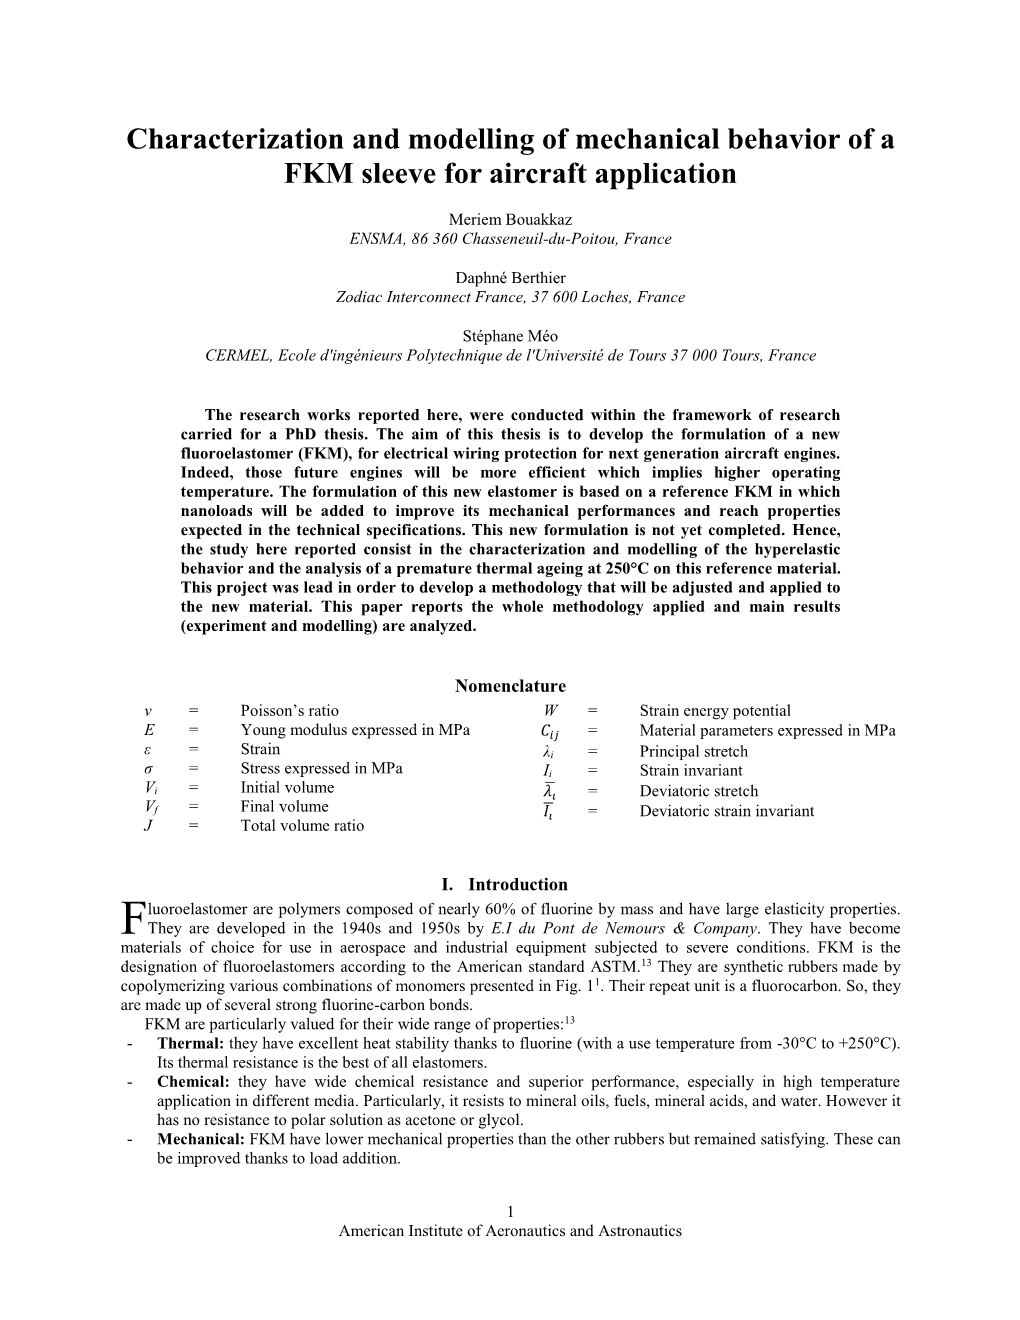 Characterization and Modelling of Mechanical Behavior of a FKM Sleeve for Aircraft Application